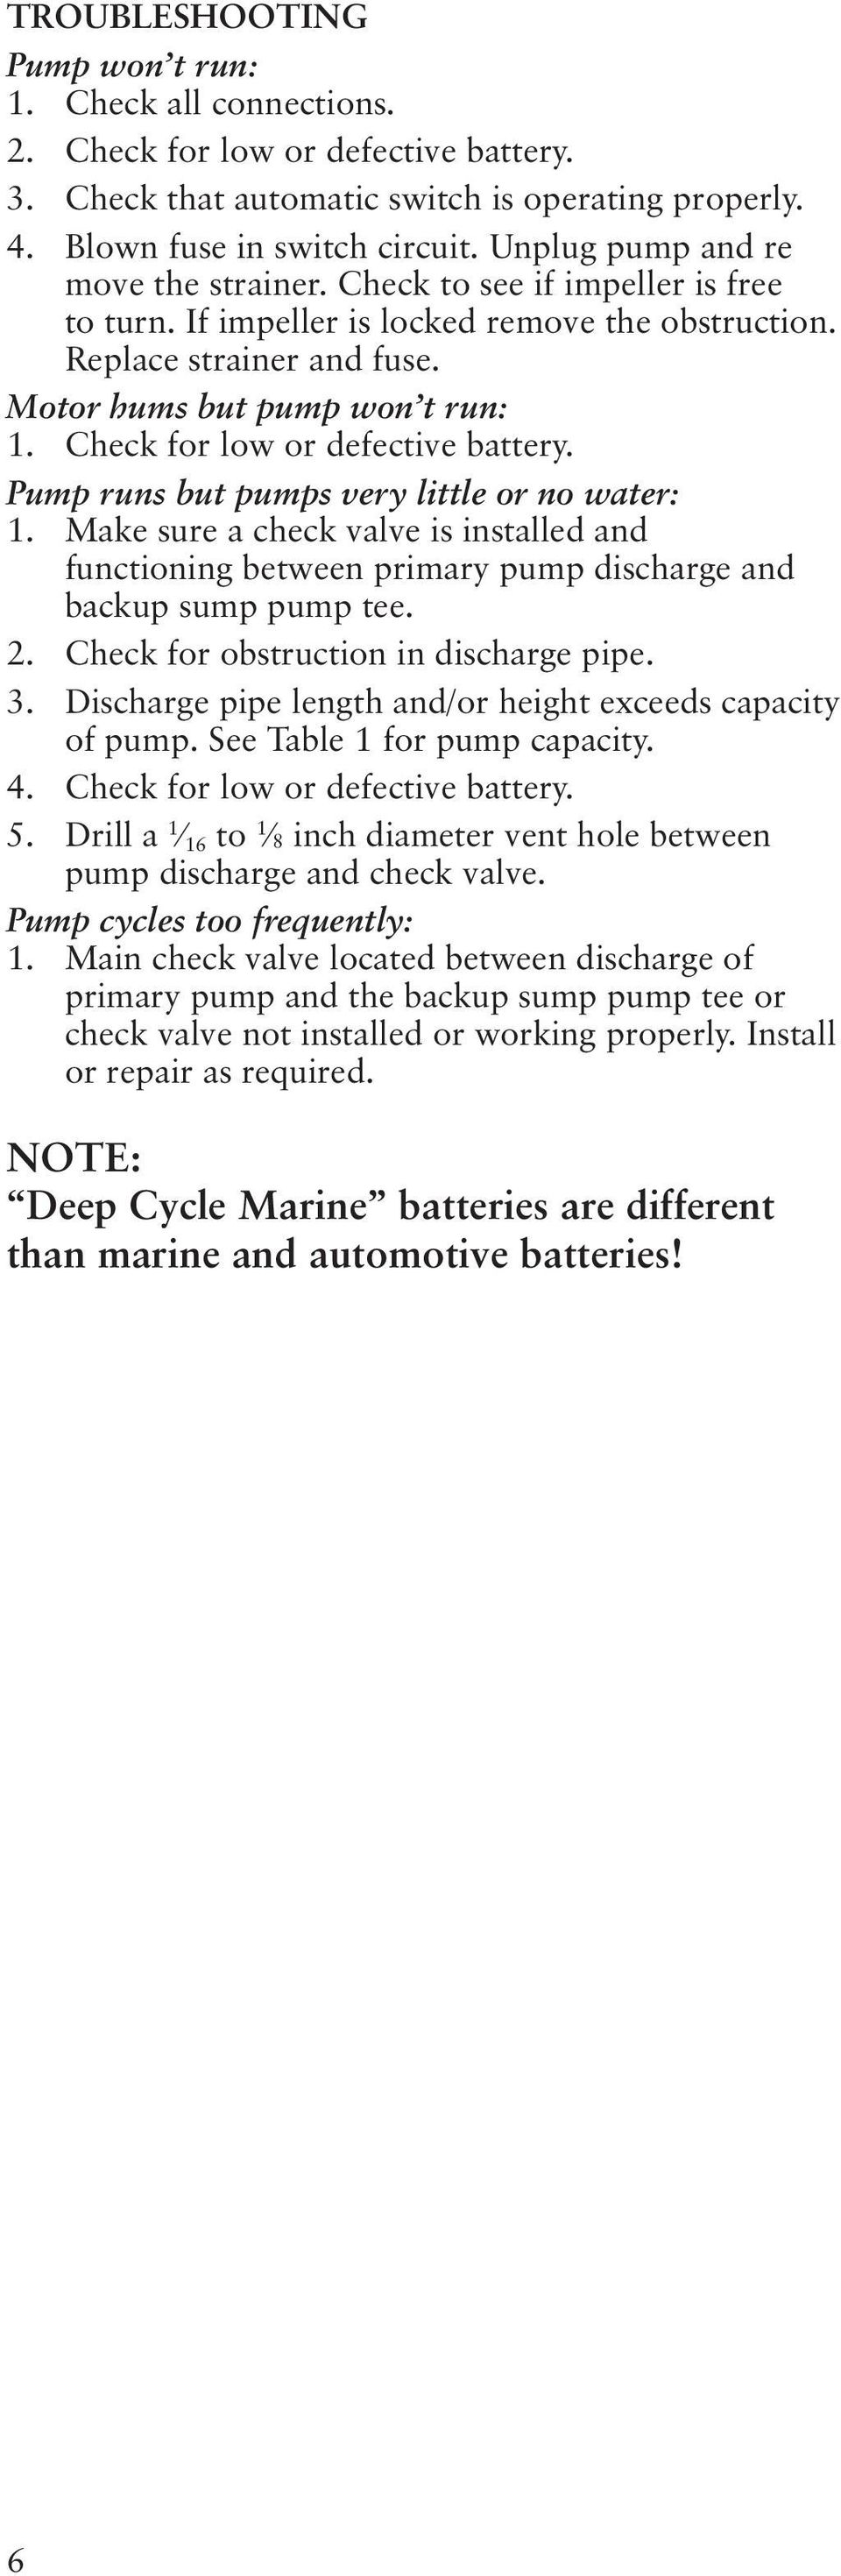 Check for low or defective battery. Pump runs but pumps very little or no water: 1. Make sure a check valve is installed and functioning between primary pump discharge and backup sump pump tee. 2.